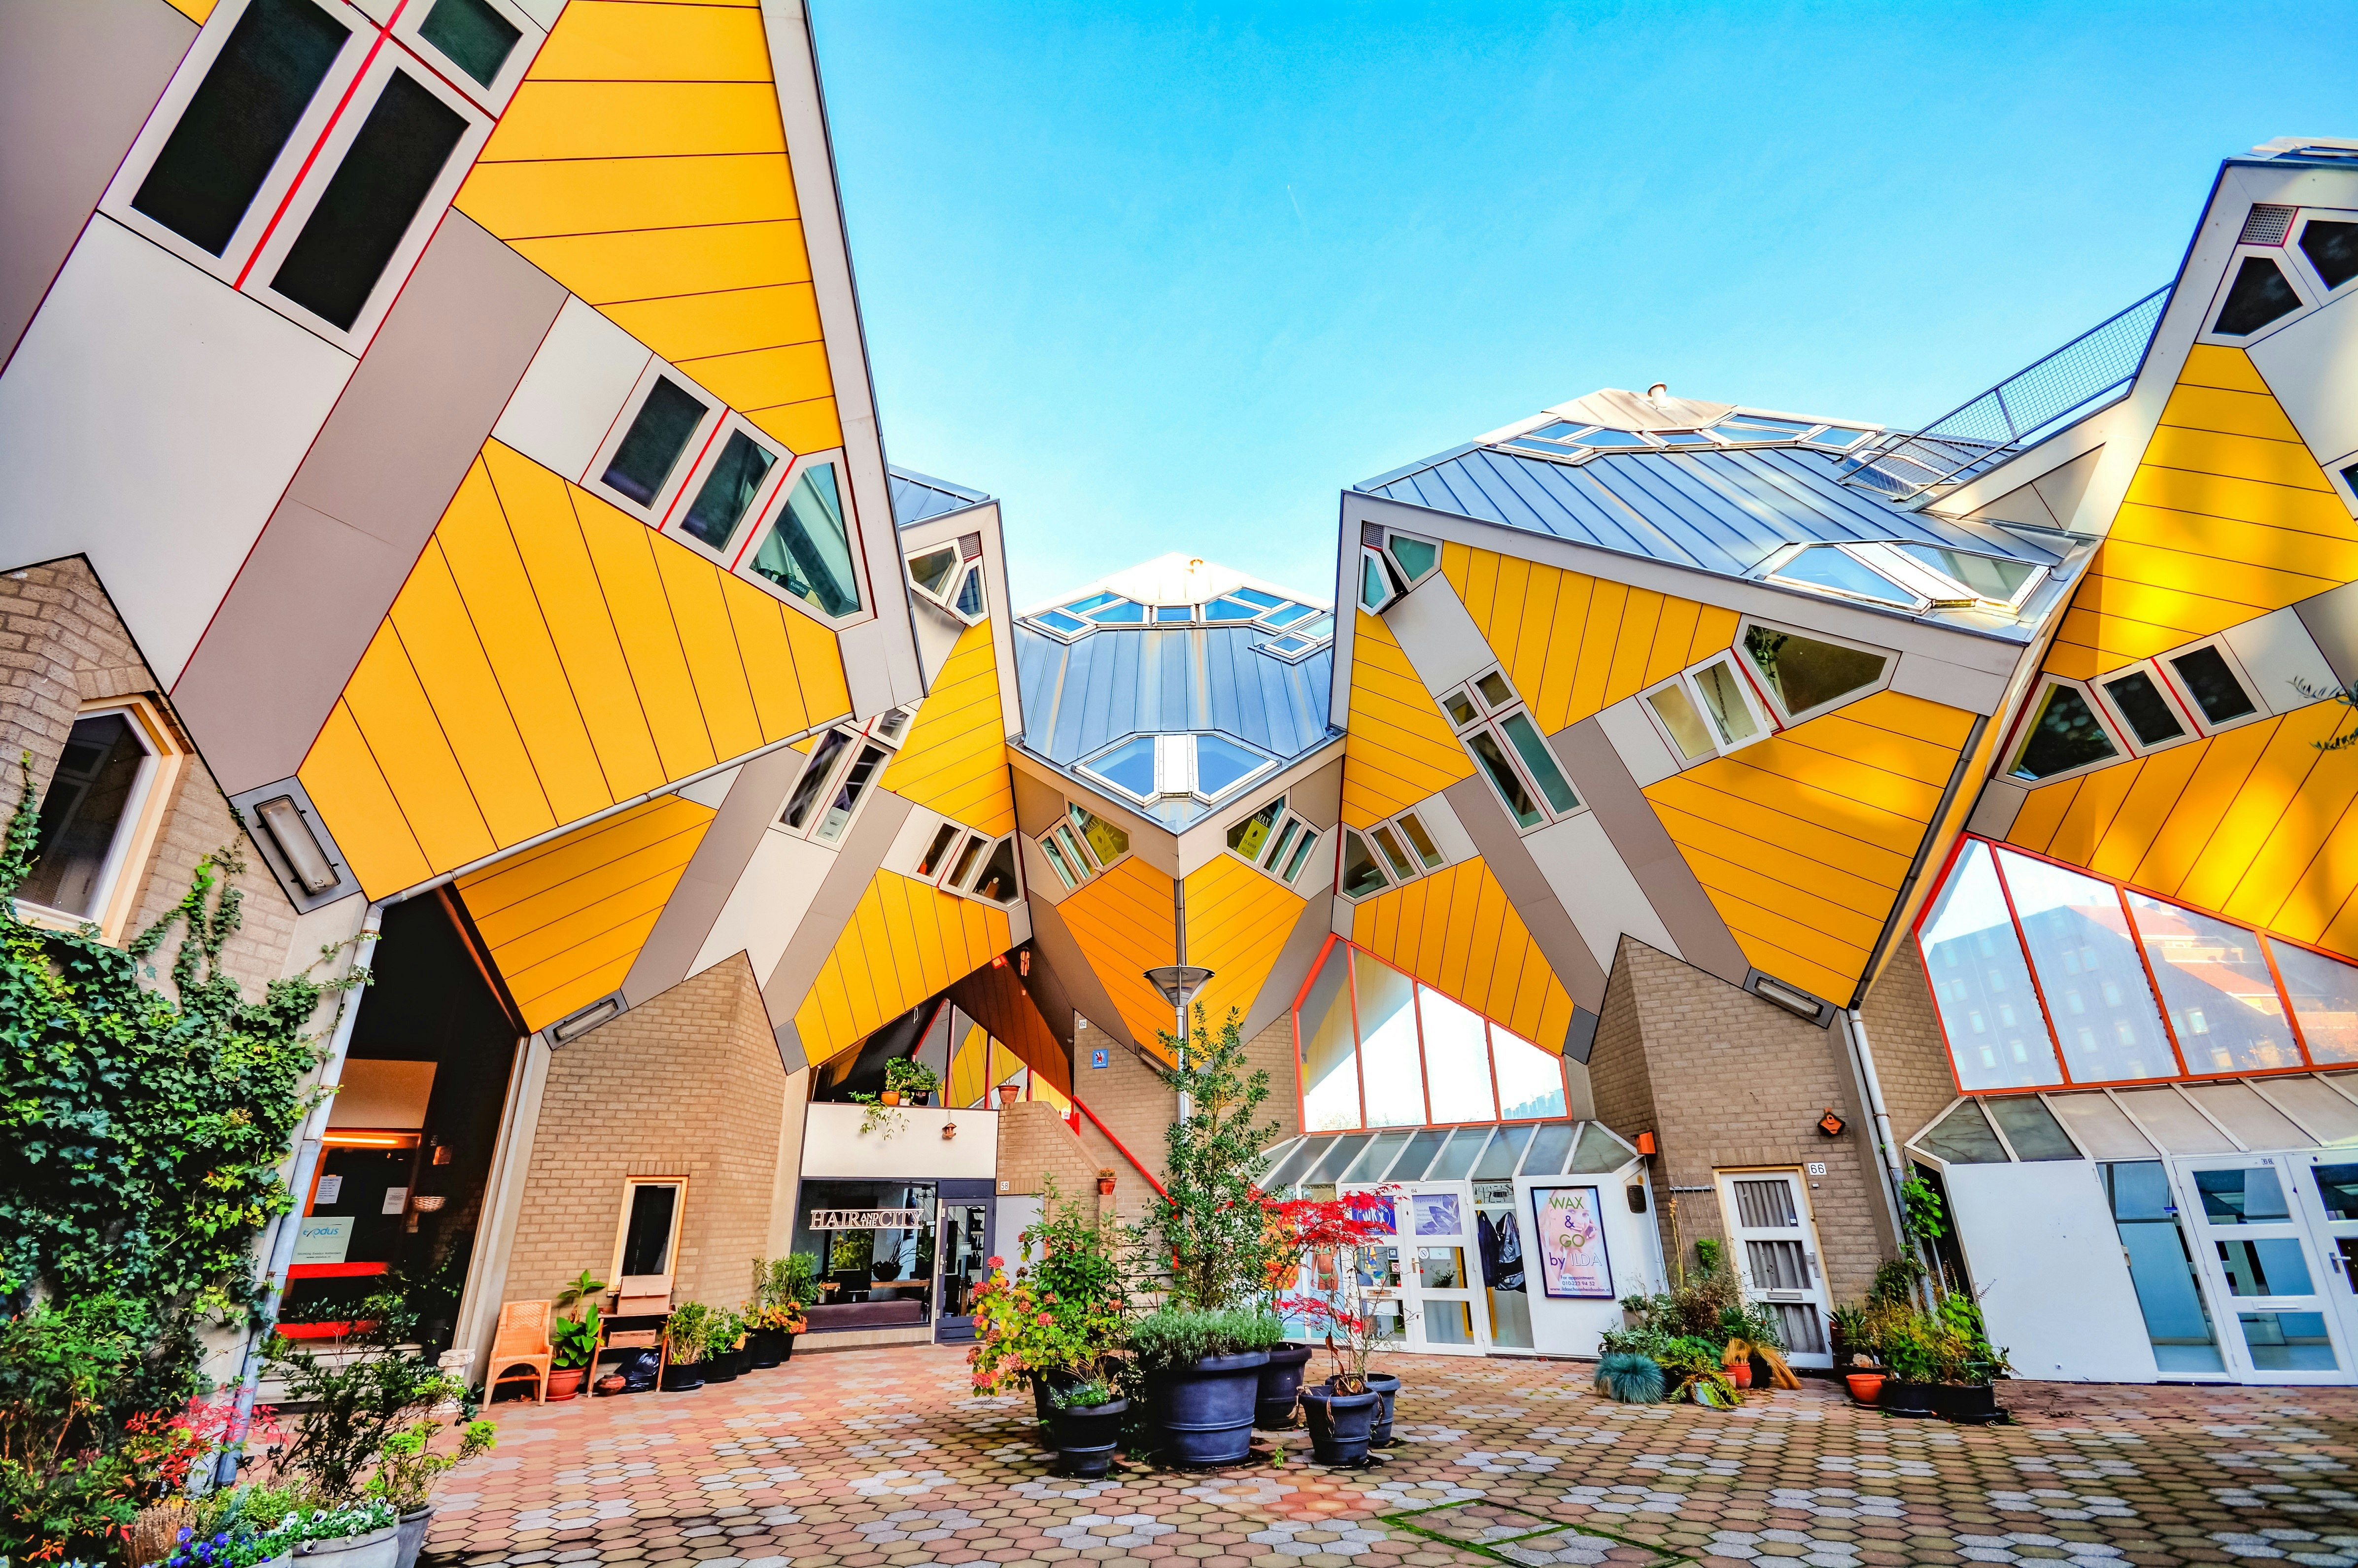 Rotterdam's Cube Houses, yellow and white homes that resemble cubes tiled at 45 degrees above the ground. 